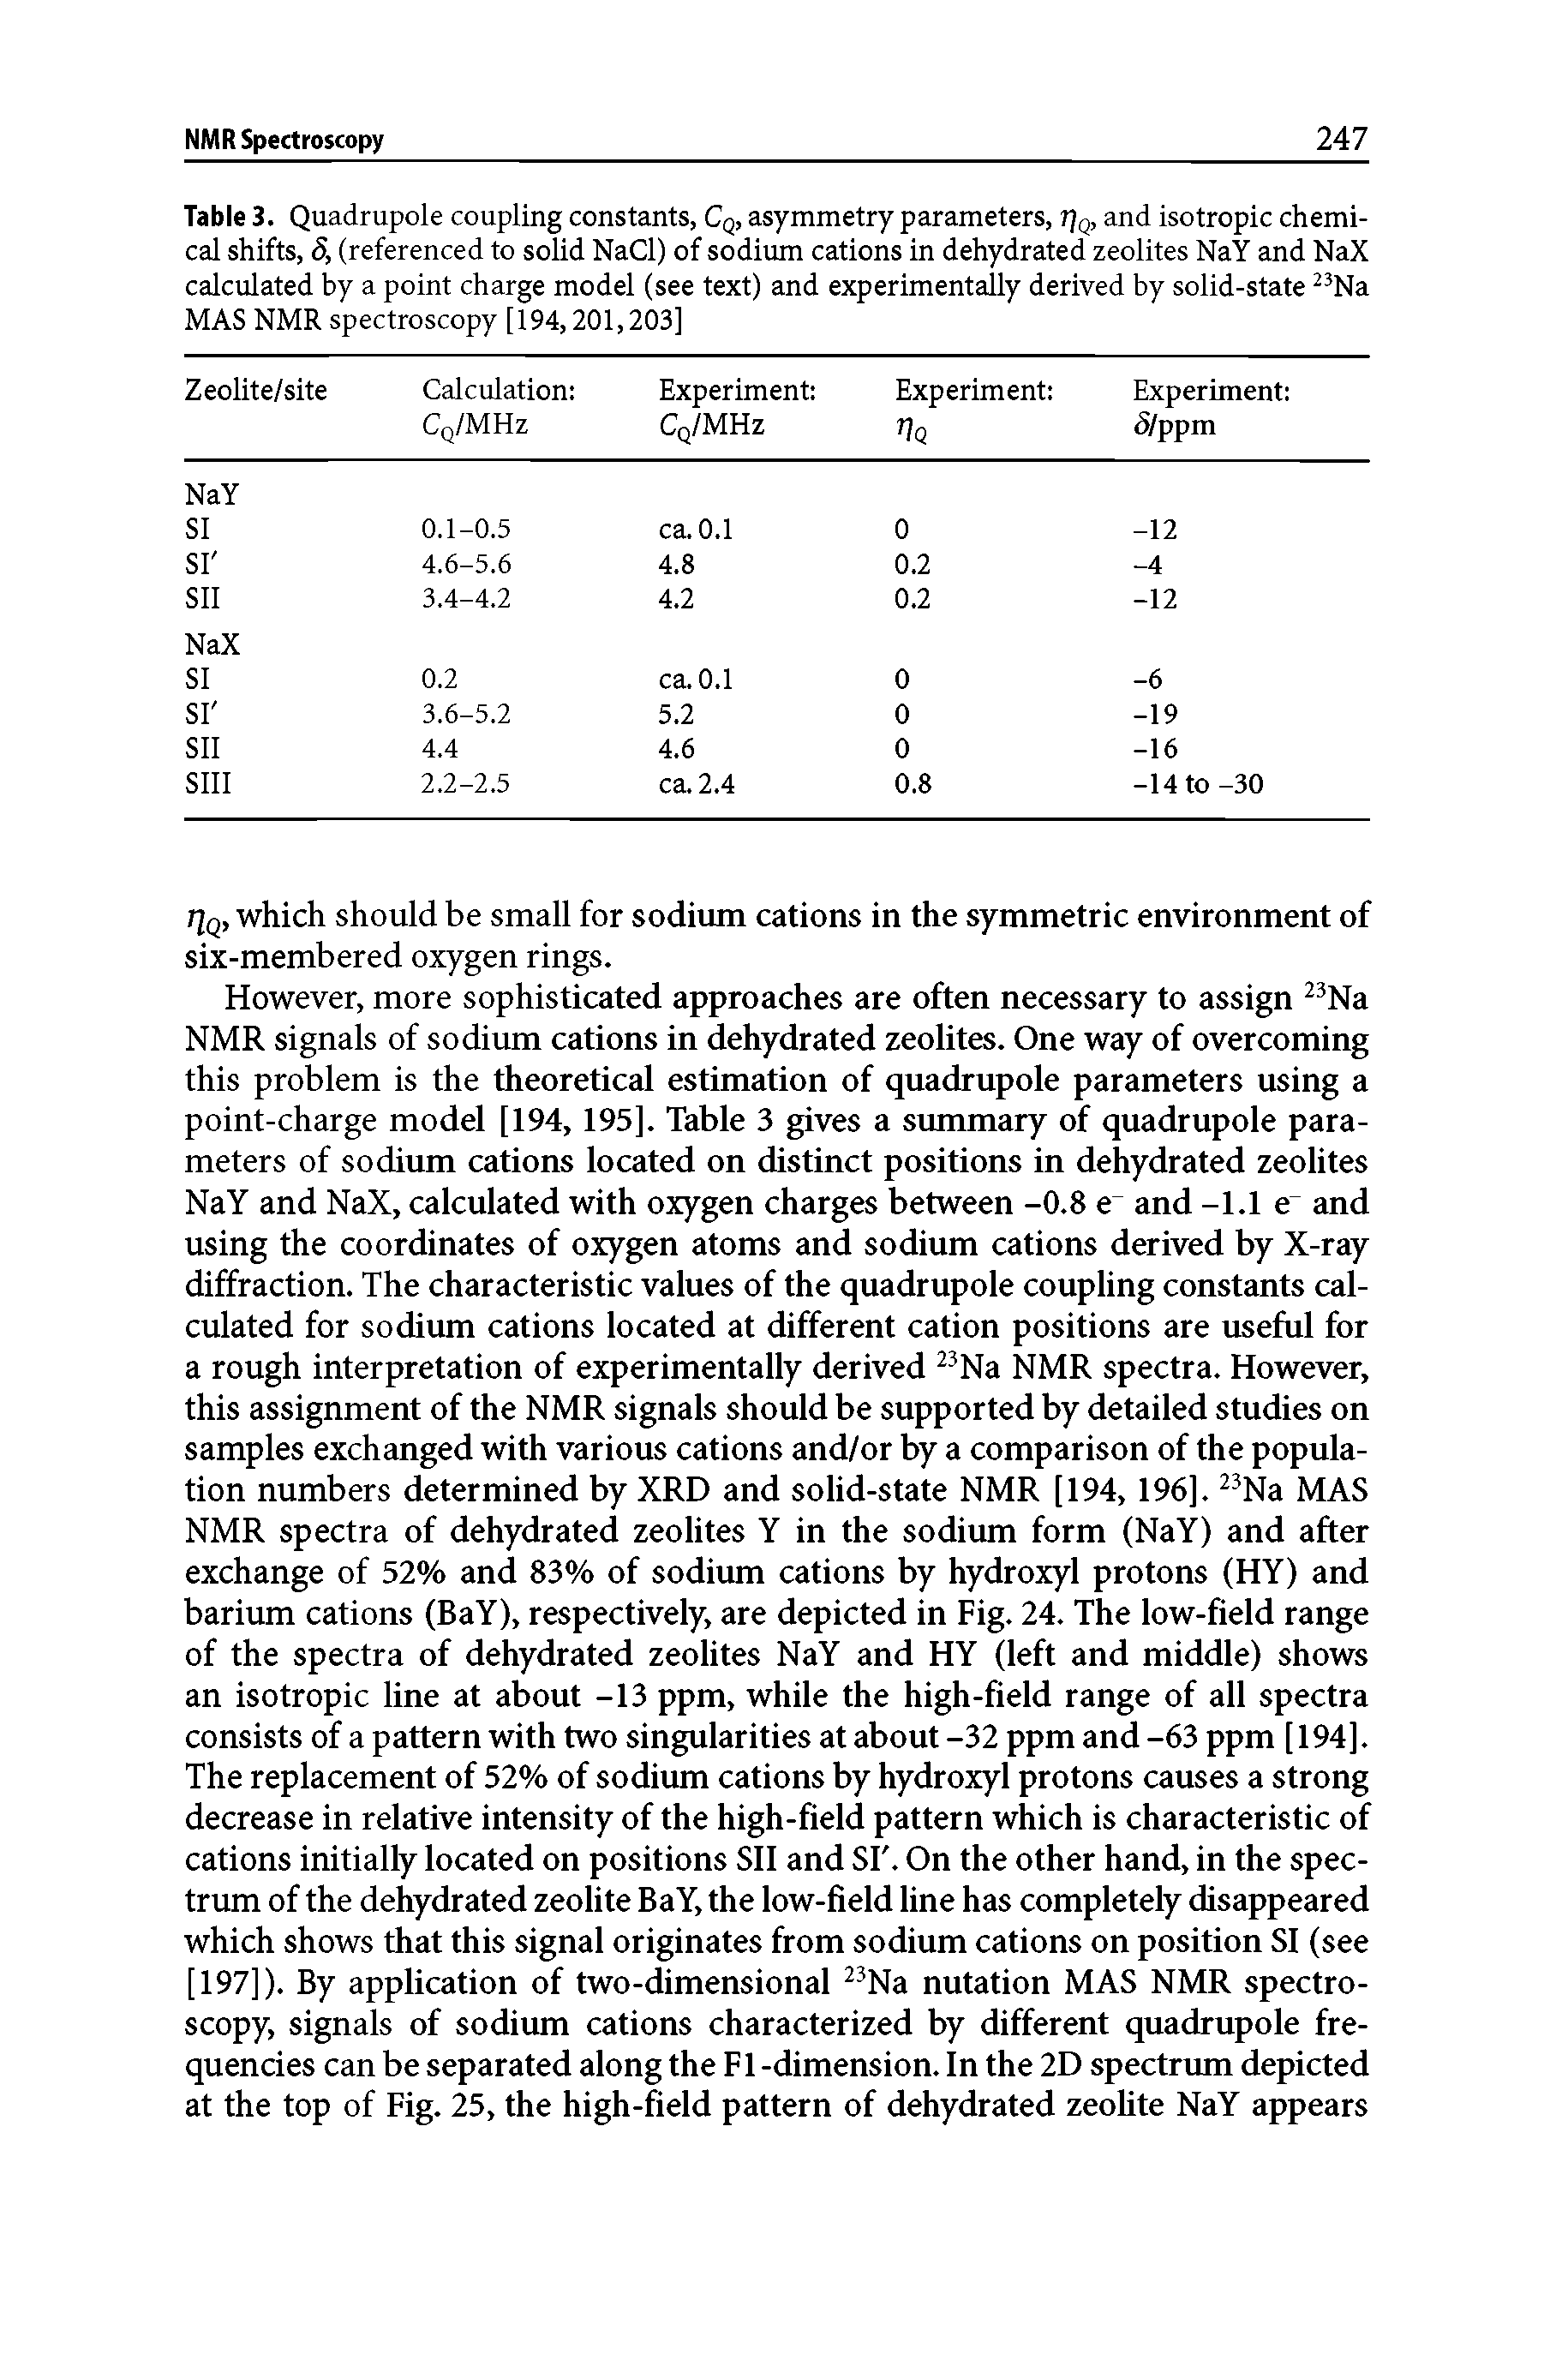 Table 3. Quadrupole coupling constants, Cq, asymmetry parameters, 7]q, and isotropic chemical shifts, 5, (referenced to solid NaCl) of sodium cations in dehydrated zeolites NaY and NaX calculated by a point charge model (see text) and experimentally derived by solid-state Na MAS NMR spectroscopy [194,201,203] ...